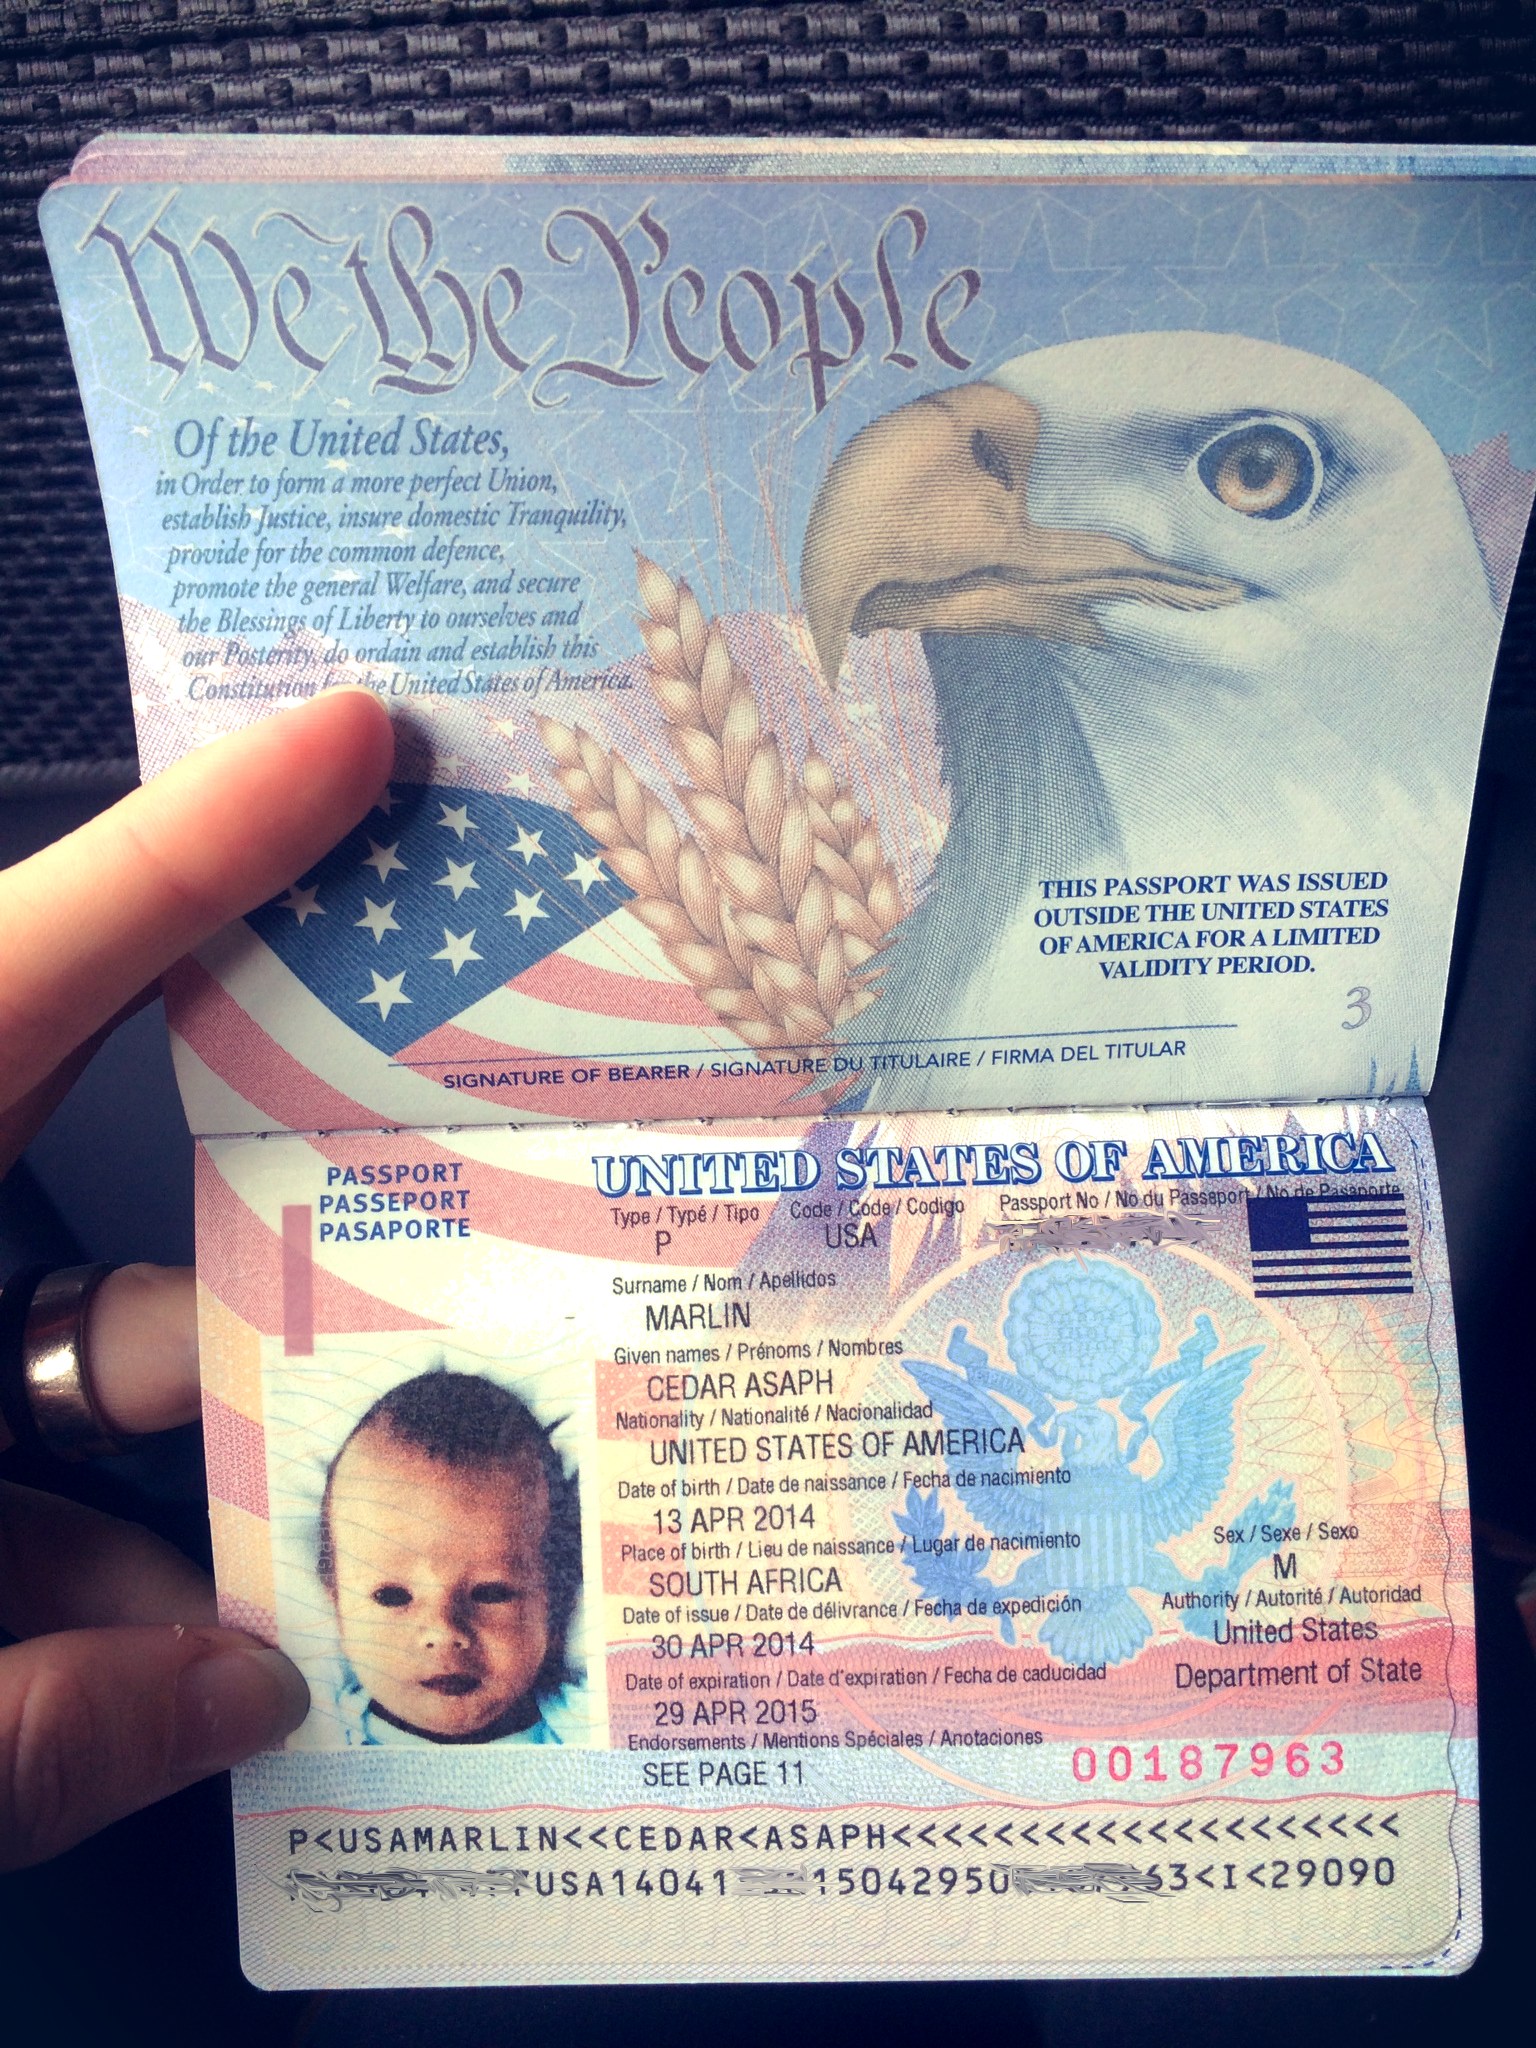 creepy alien baby passport, they stretched his head.